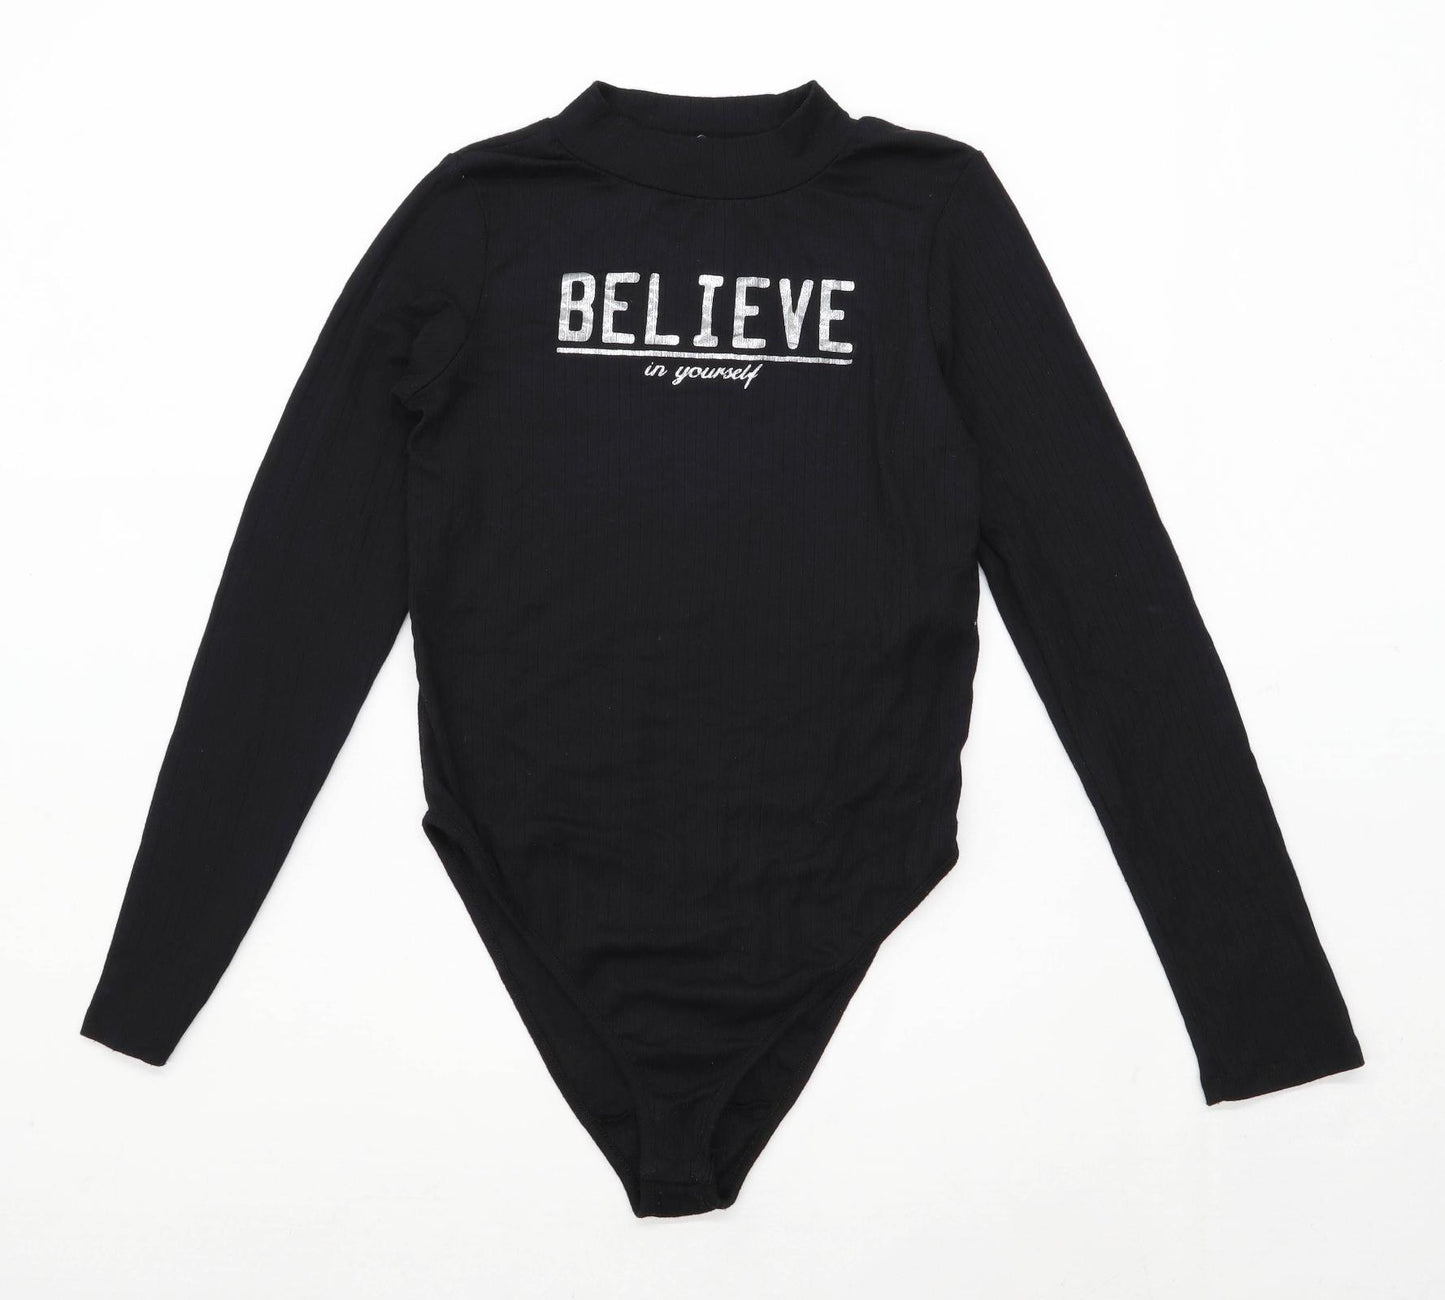 Young Dimension Girls Graphic Black Believe In Yourself Bodysuit Age 12-13 Years